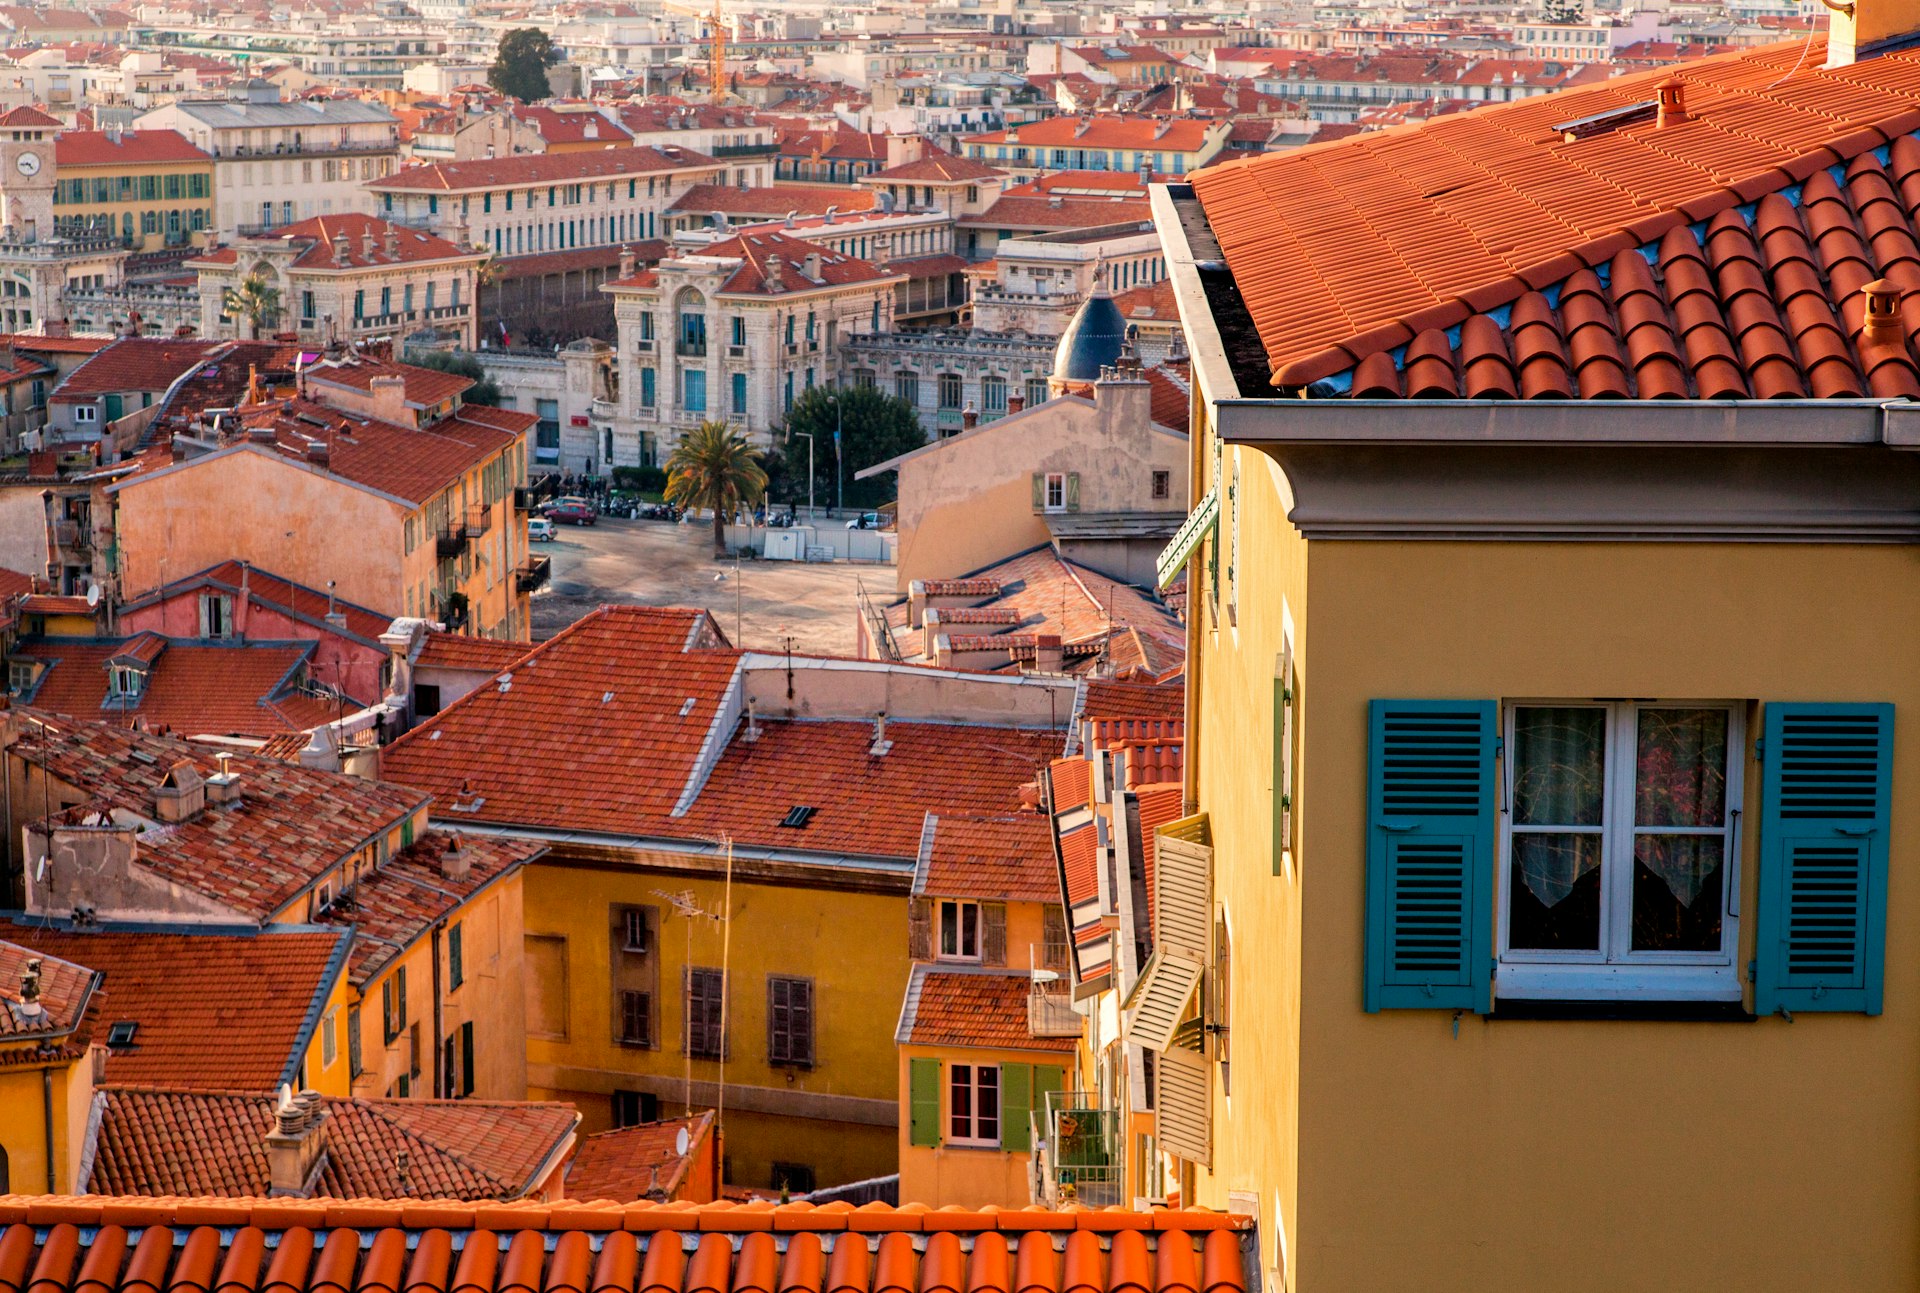 Roofs of the Old Town of Nice, Côte d’Azur, France